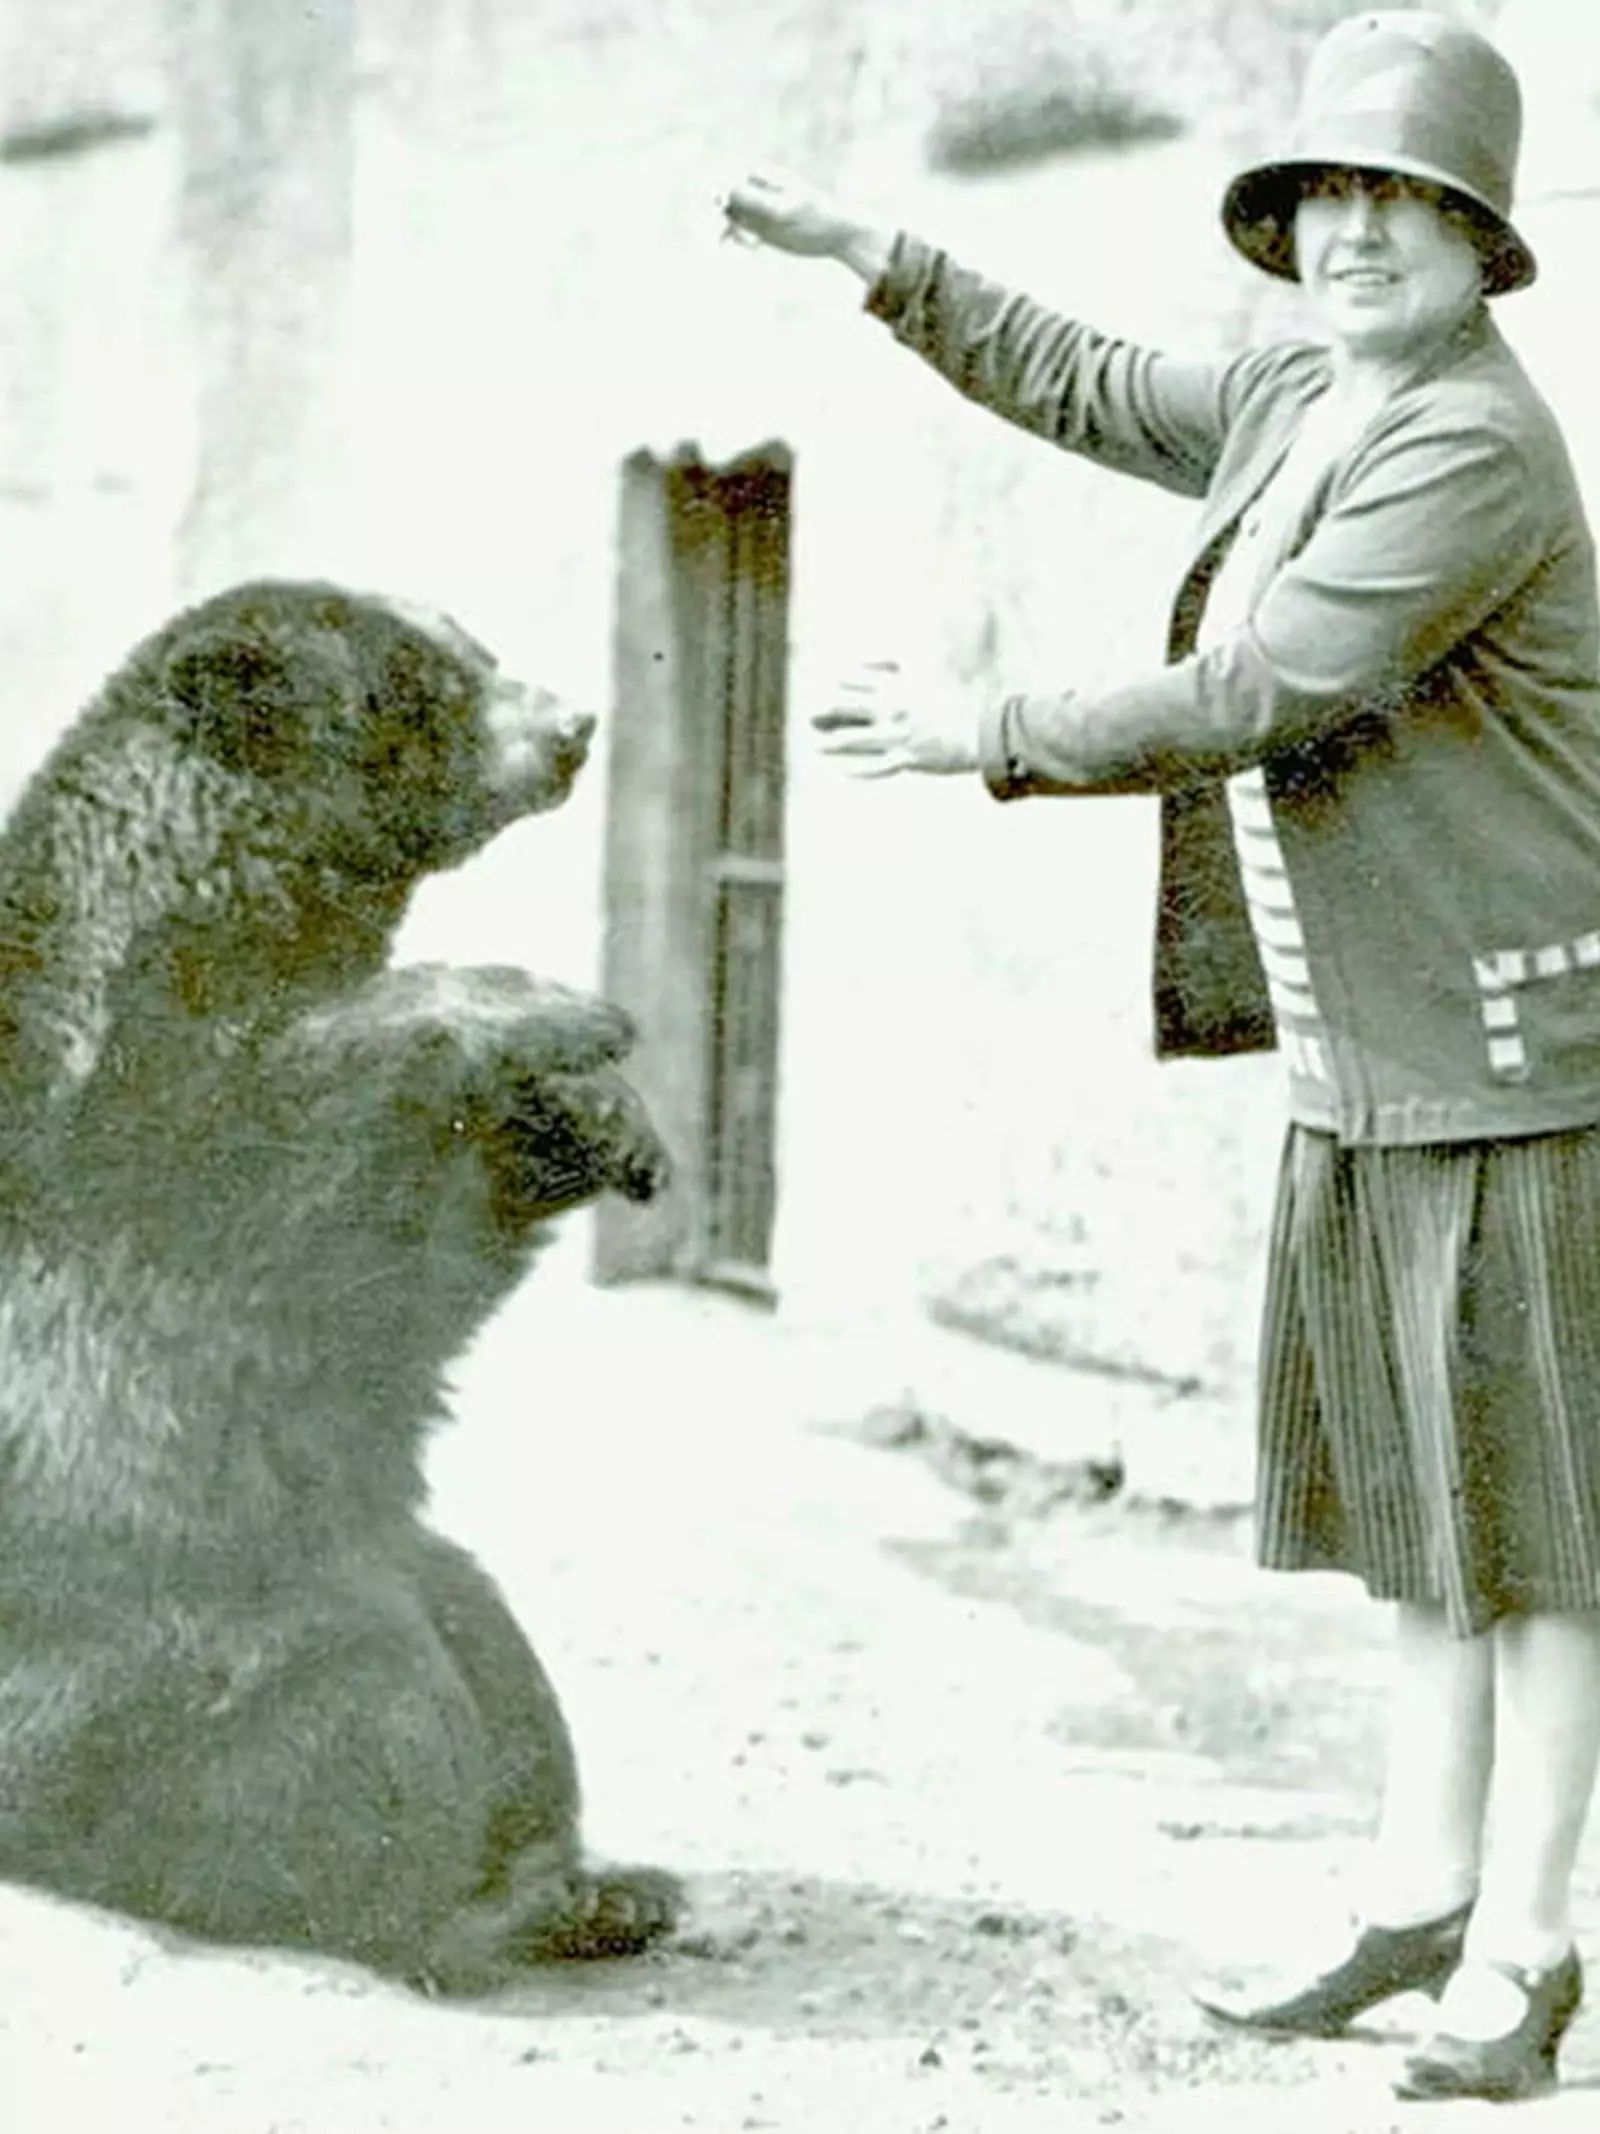 The black bear Winnie which provided inspiration for Winnie the Pooh, sitting with a woman,